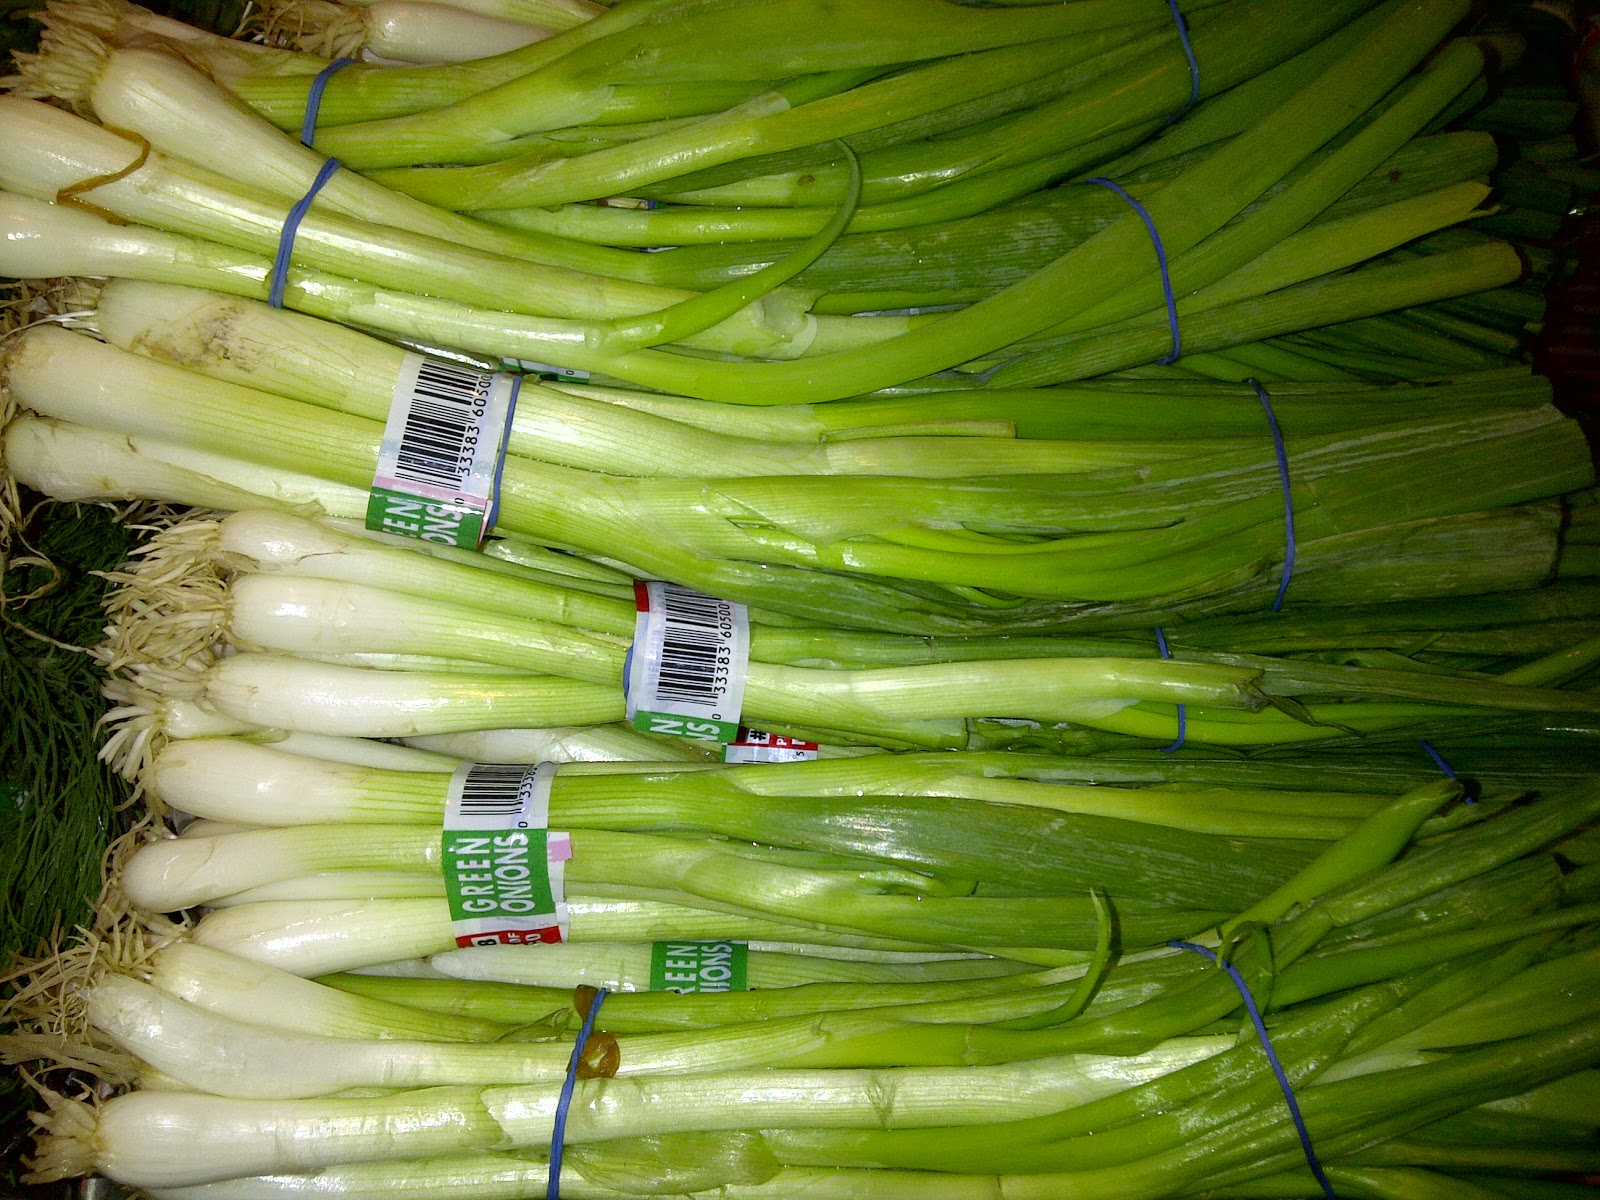 What Are Scallions